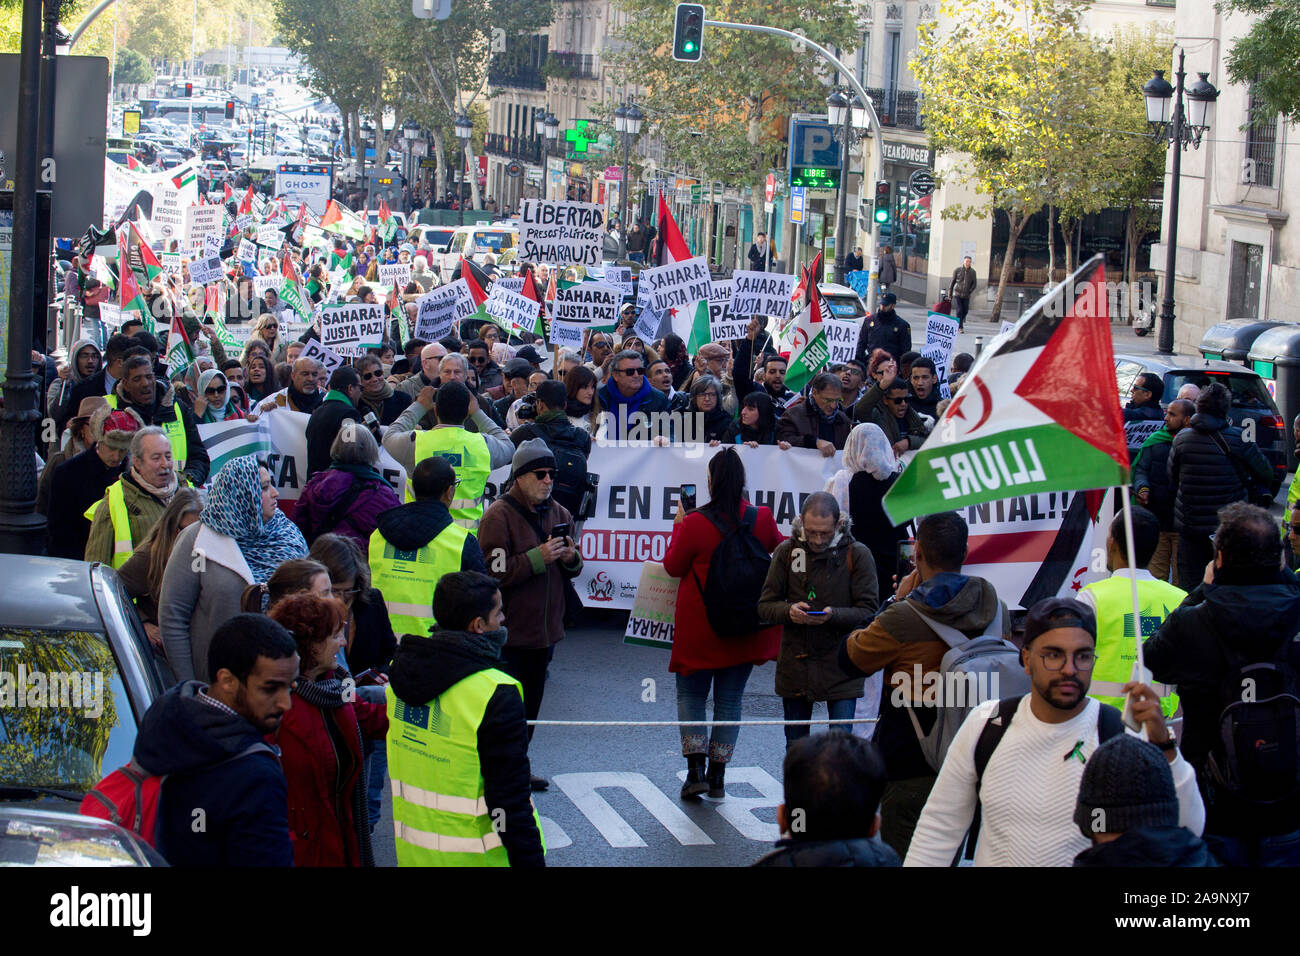 Madrid, Spain. 16th Nov, 2019. Hundreds marching through Madrid during the demonstration.Thousands of Saharawis arrive from all over Spain to demand the end of Morocco's occupation in Western Sahara, the freedom of political prisoners, in support of the Polisario Front and to demand solutions from the Spanish government. Western Sahara was a Spanish colony until 1976 where Spain left the territory. Later Morocco occupied part of Western Sahara and still part of the Saharawi population lives in refugee camps in the desert in Algeria and in Spain. Credit: SOPA Images Limited/Alamy Live News Stock Photo